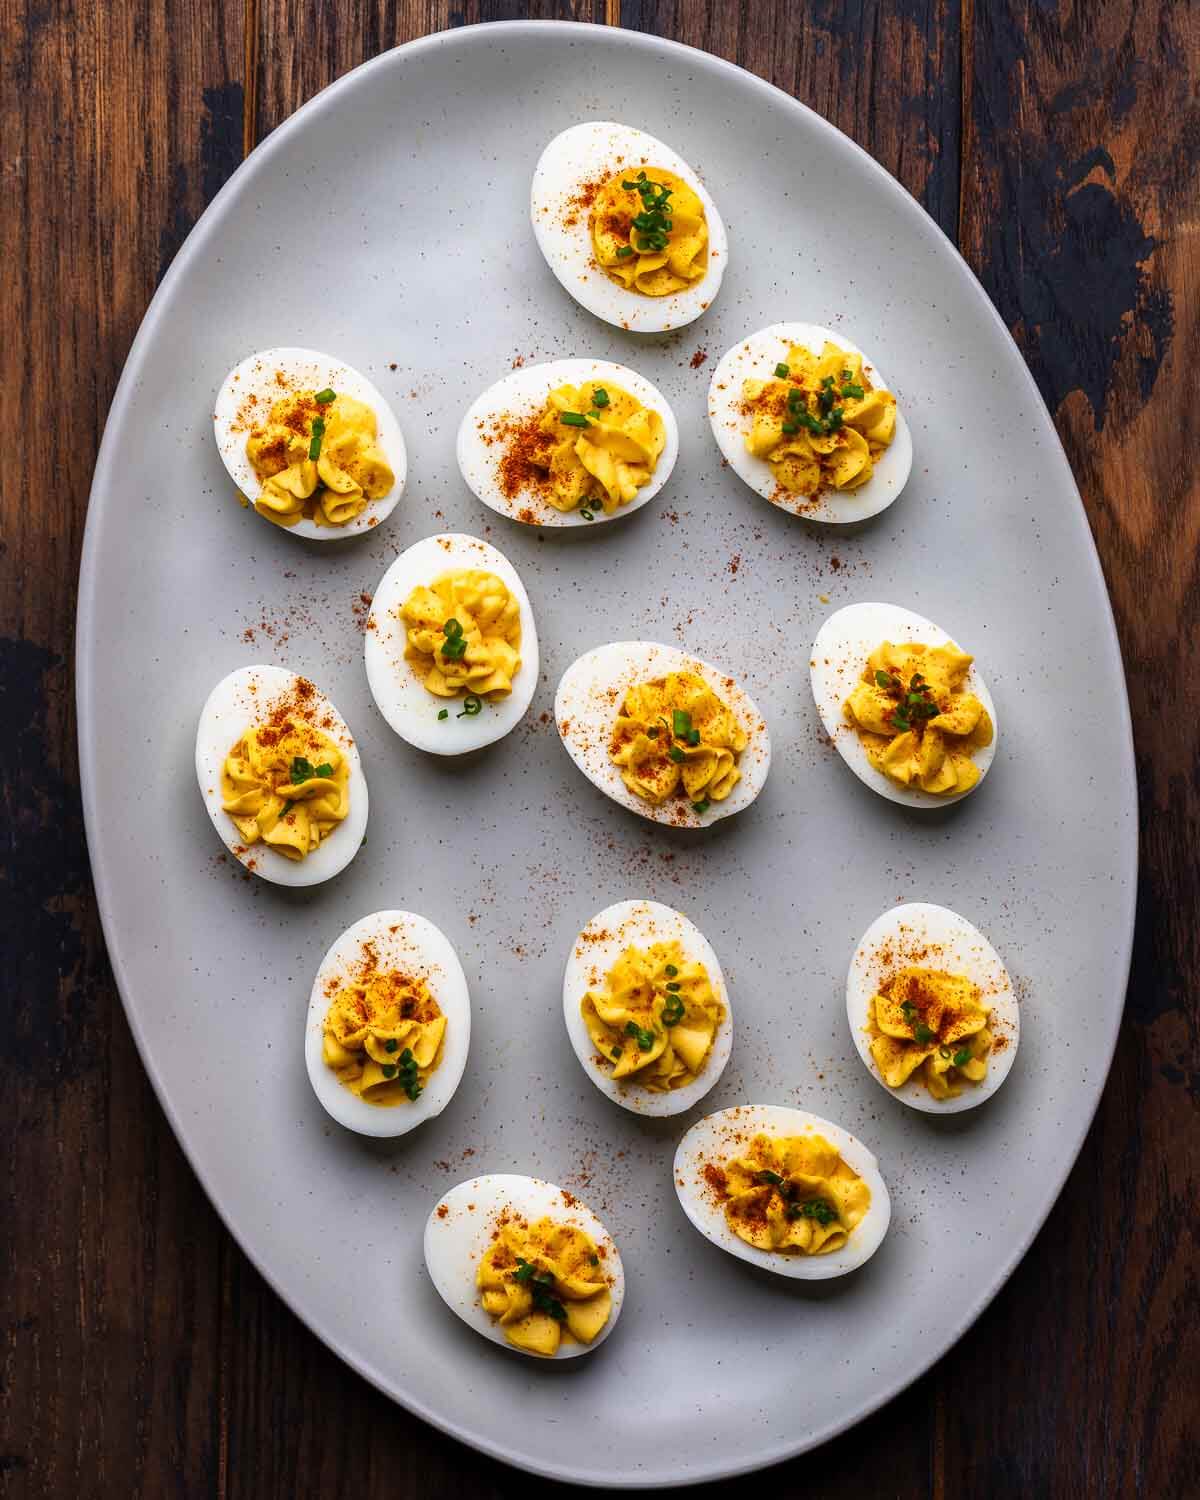 Large platter filled with classic deviled eggs on wood table.